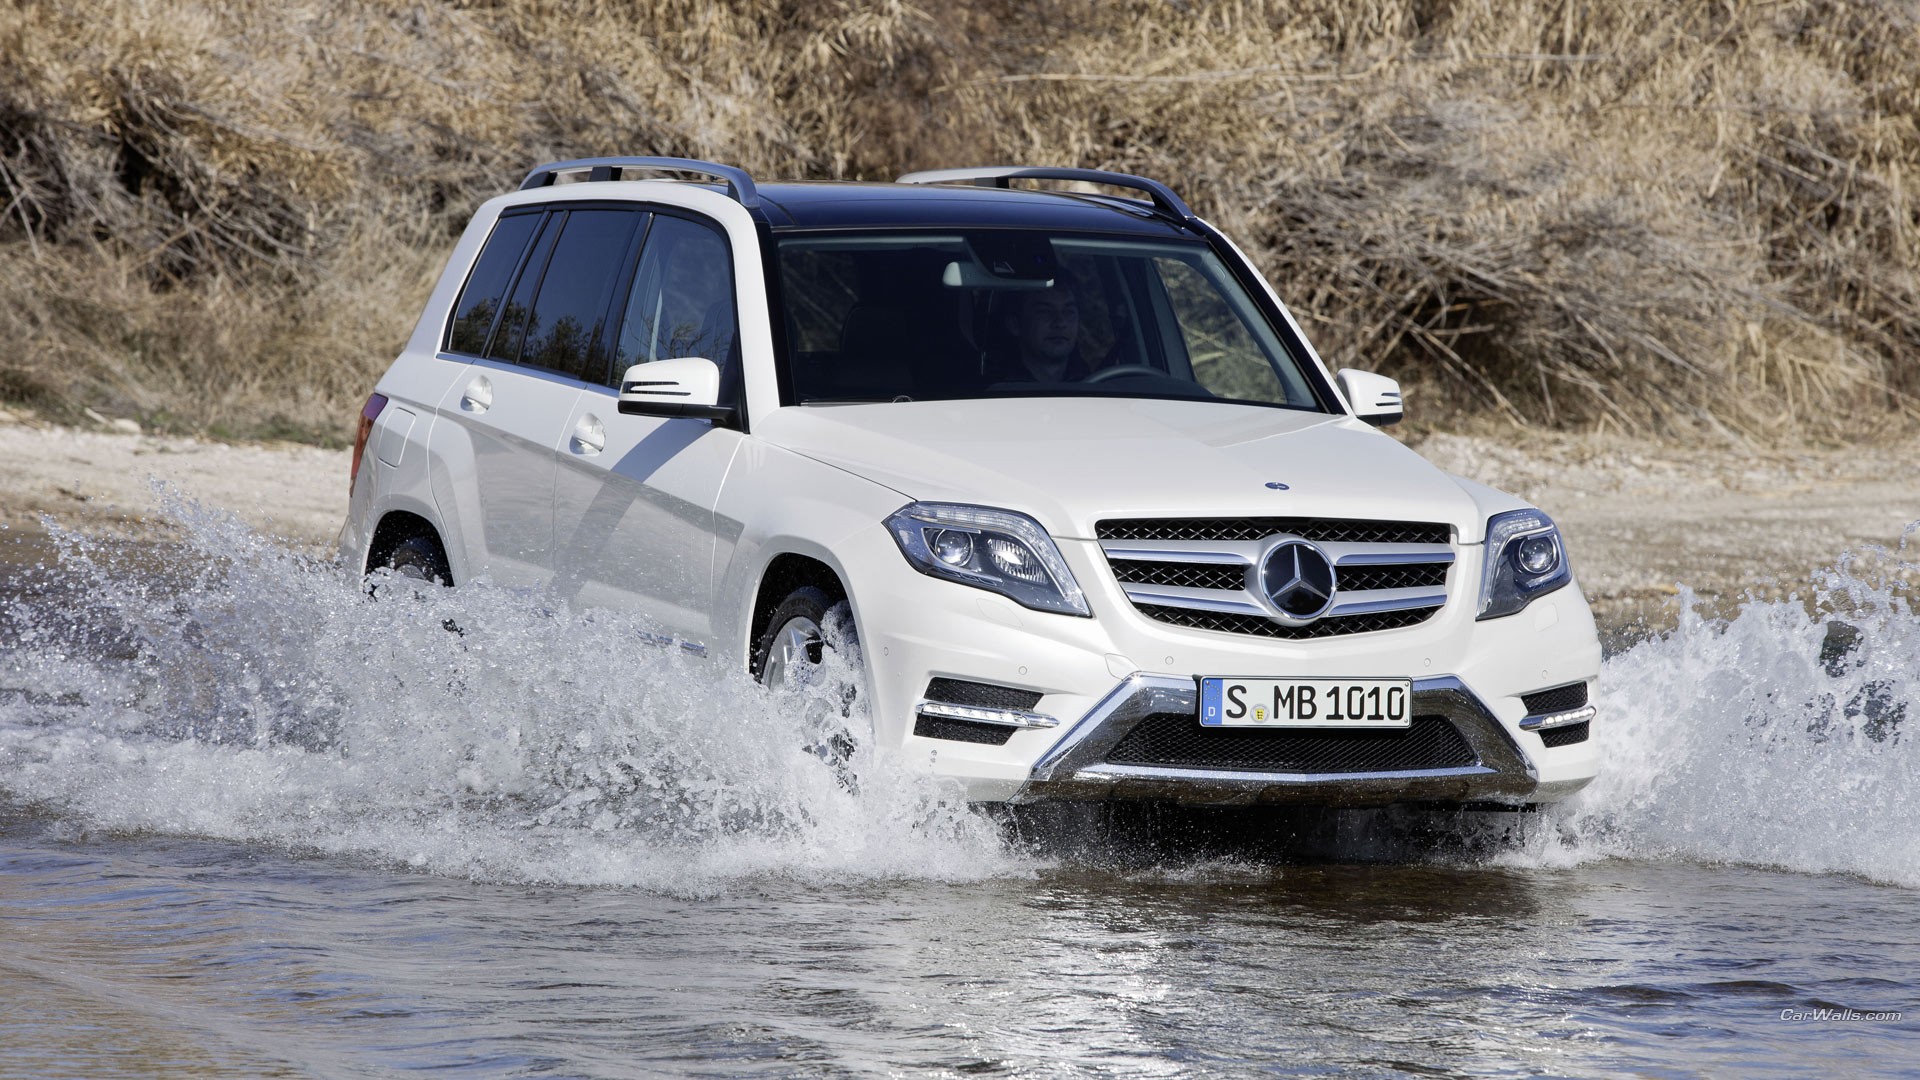 General 1920x1080 Mercedes GLK car white cars vehicle Mercedes-Benz water outdoors German cars SUV